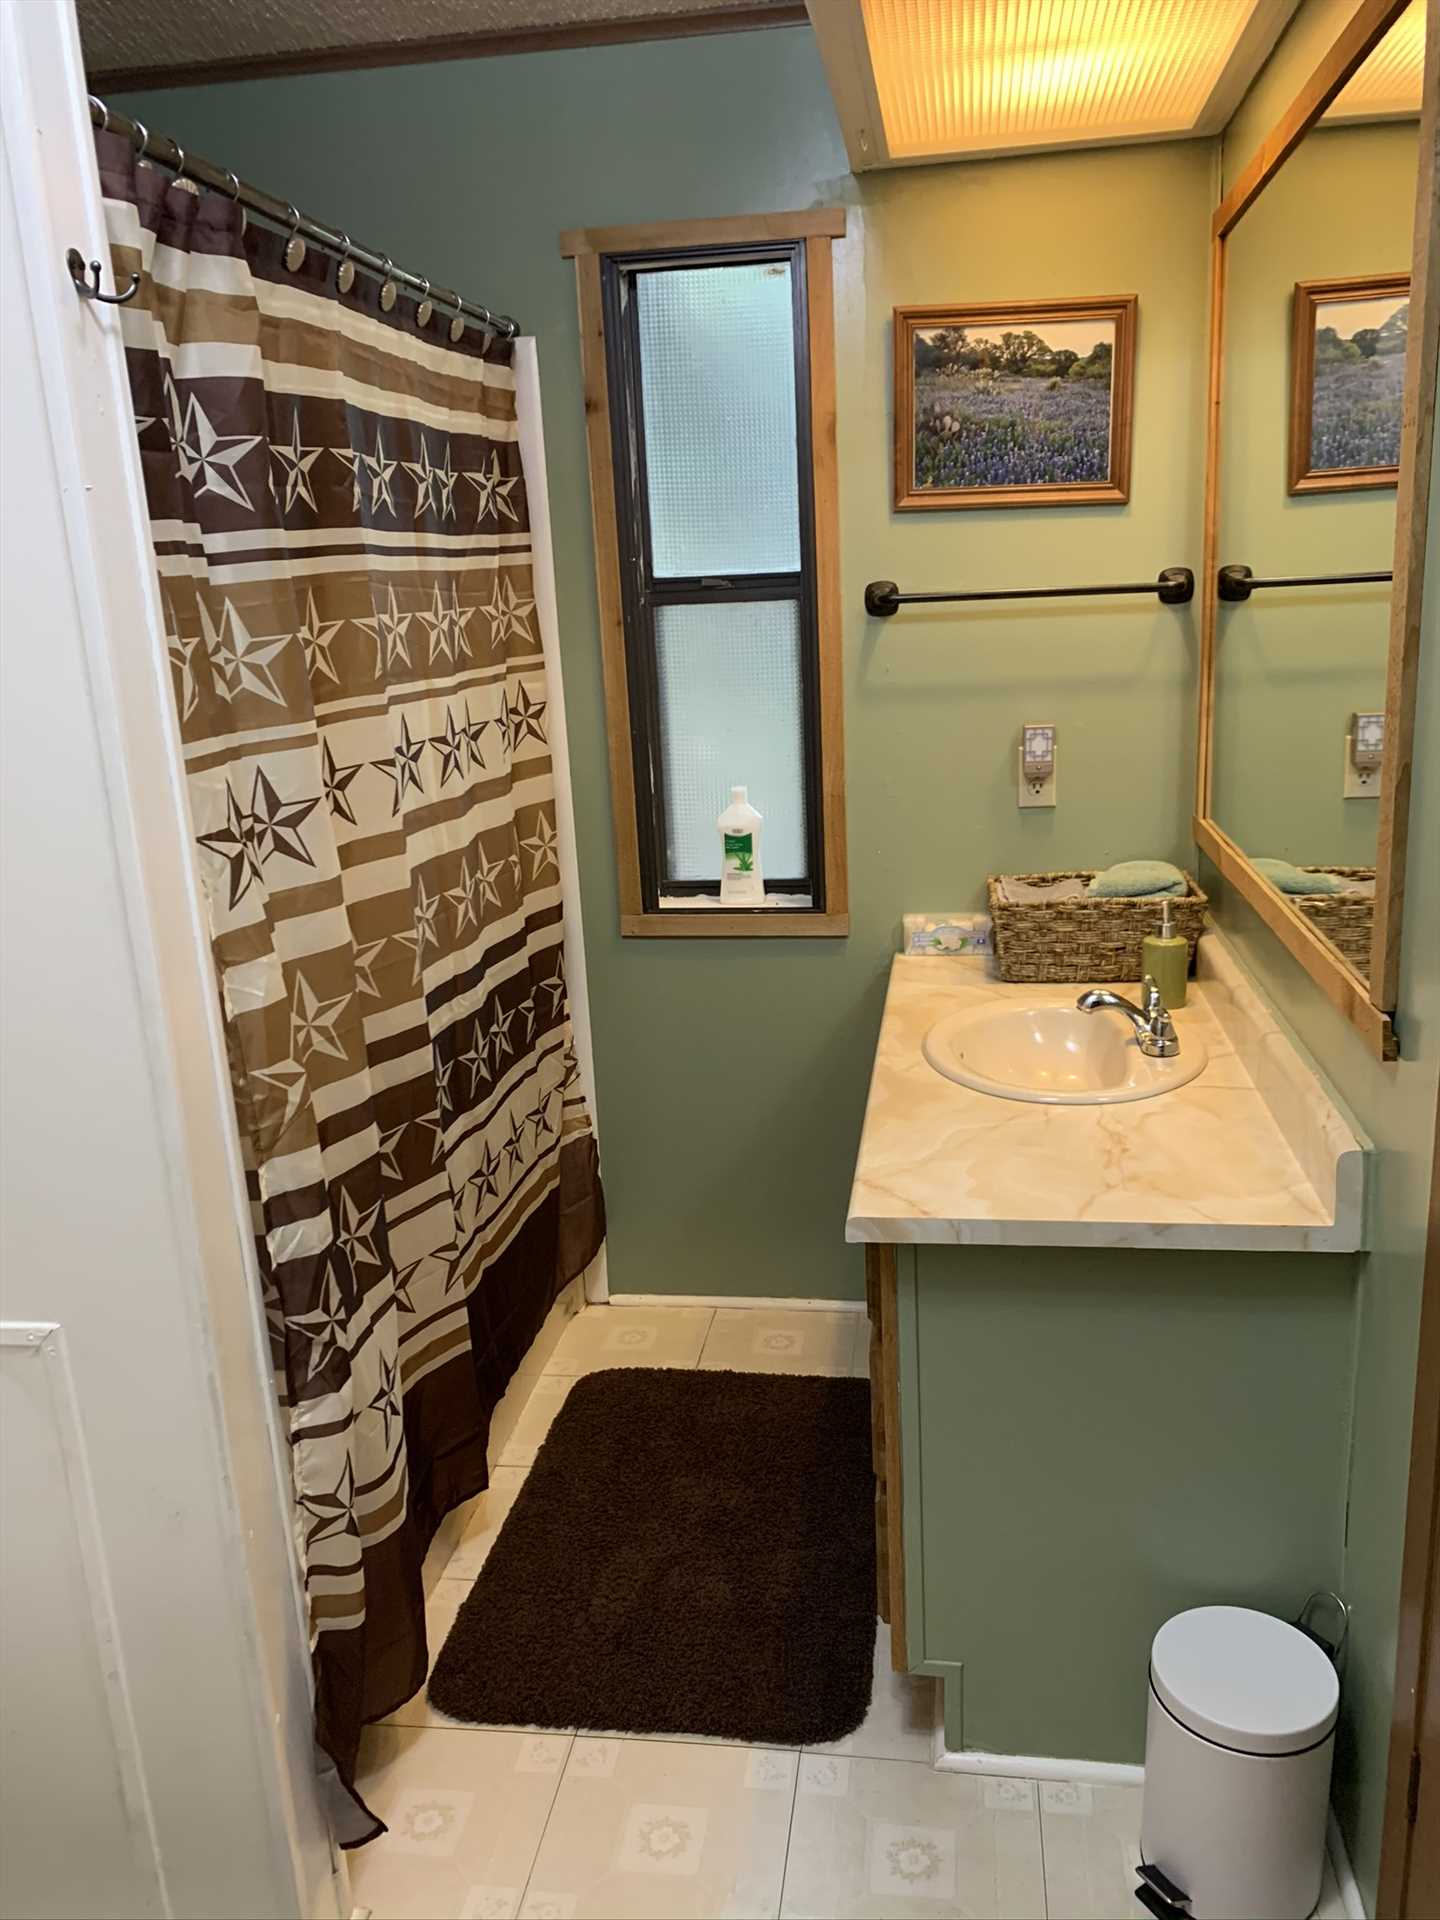                                                 A shower and tub combo, along with plenty of complimentary linens, can be found in the second bath.